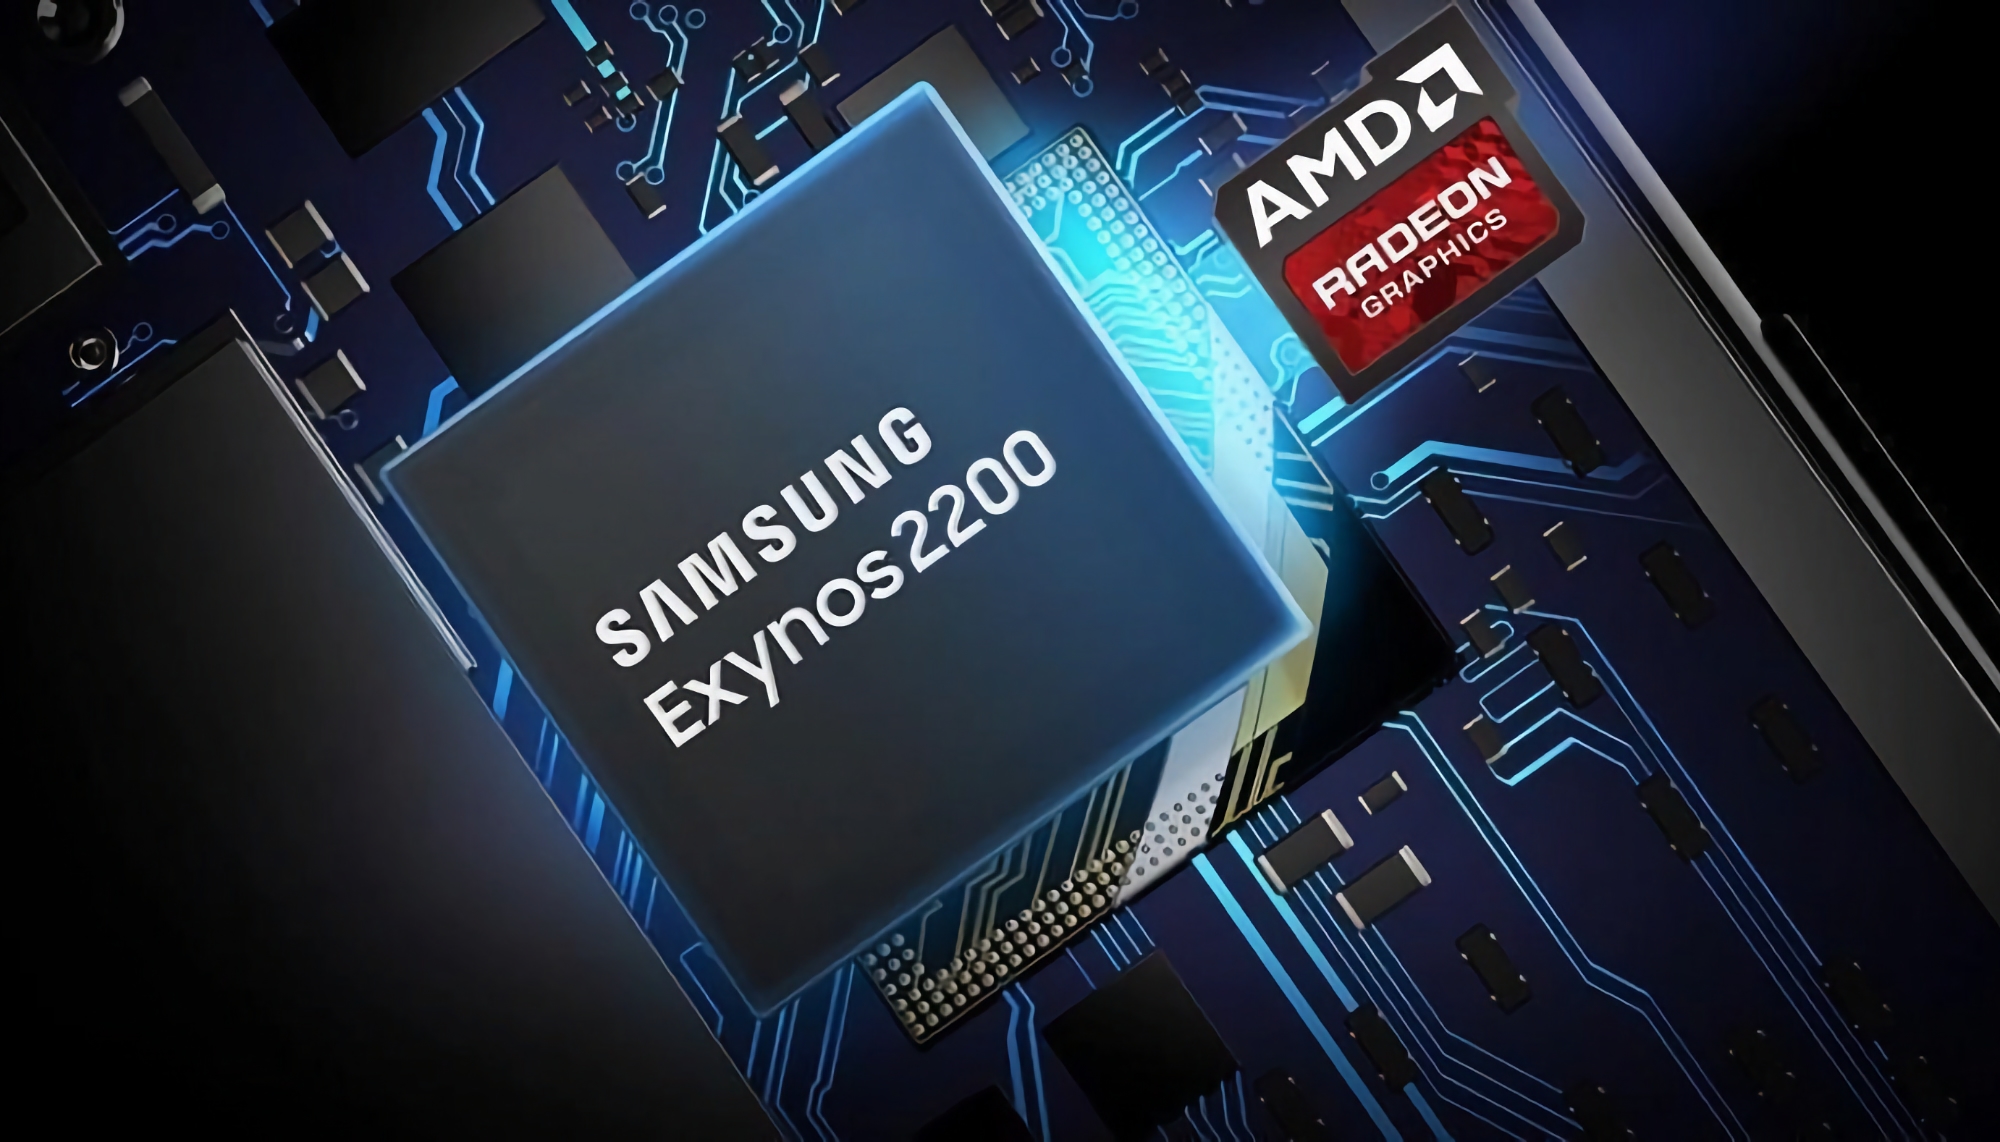 Insider: Samsung's mid-budget smartphones will get Exynos chips with AMD graphics